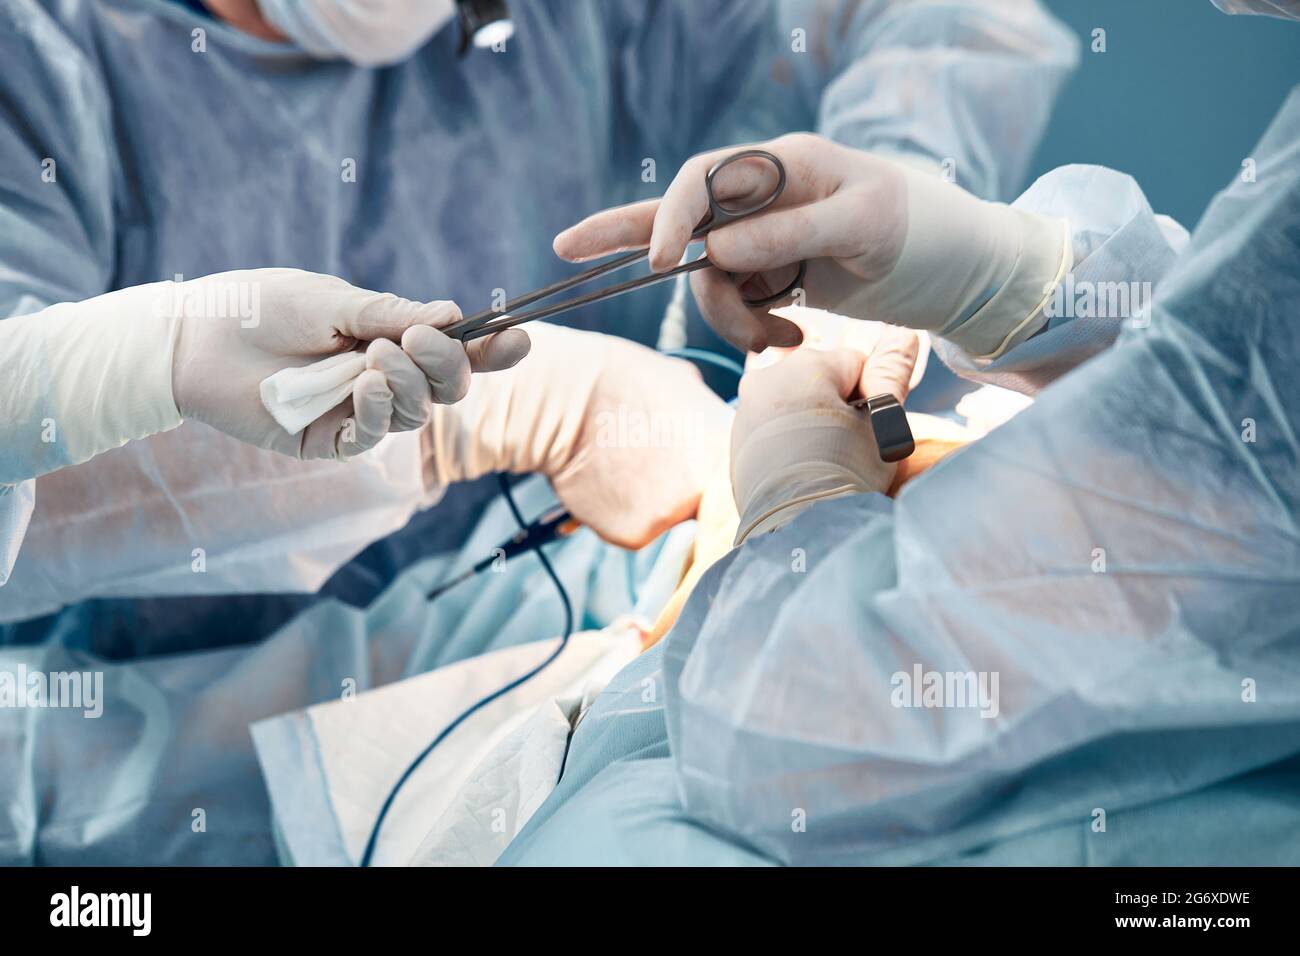 Hands of doctors in gloves during an operation, a close-up of an operating nurse gives a clamp to a surgeon, the styryl space is needed by a patient d Stock Photo